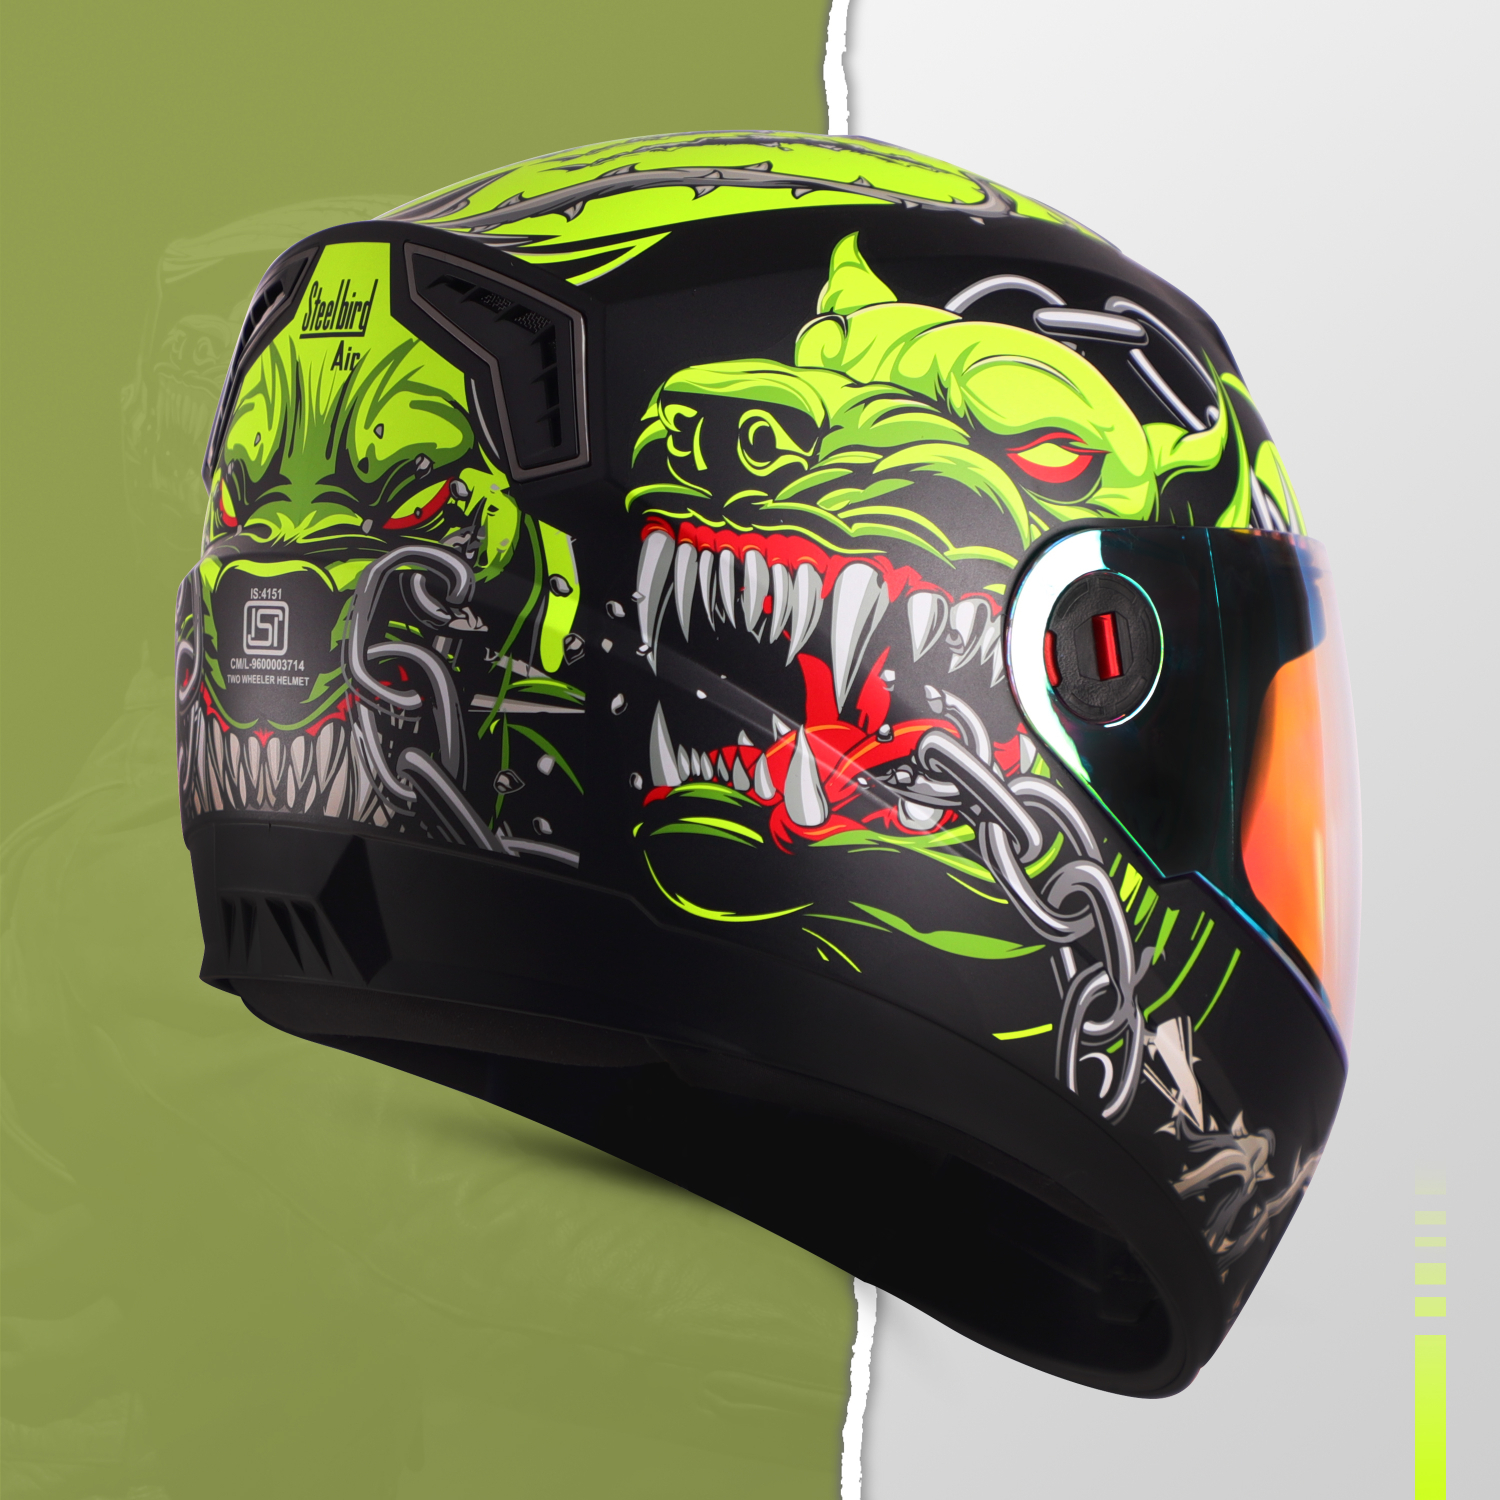 Steelbird SBA-1 Angry Dog ISI Certified Full Face Graphic Helmet For Men And Women With Inner Smoke Sun Shield (Glossy Black Neon With Night Vision Gold Visor)